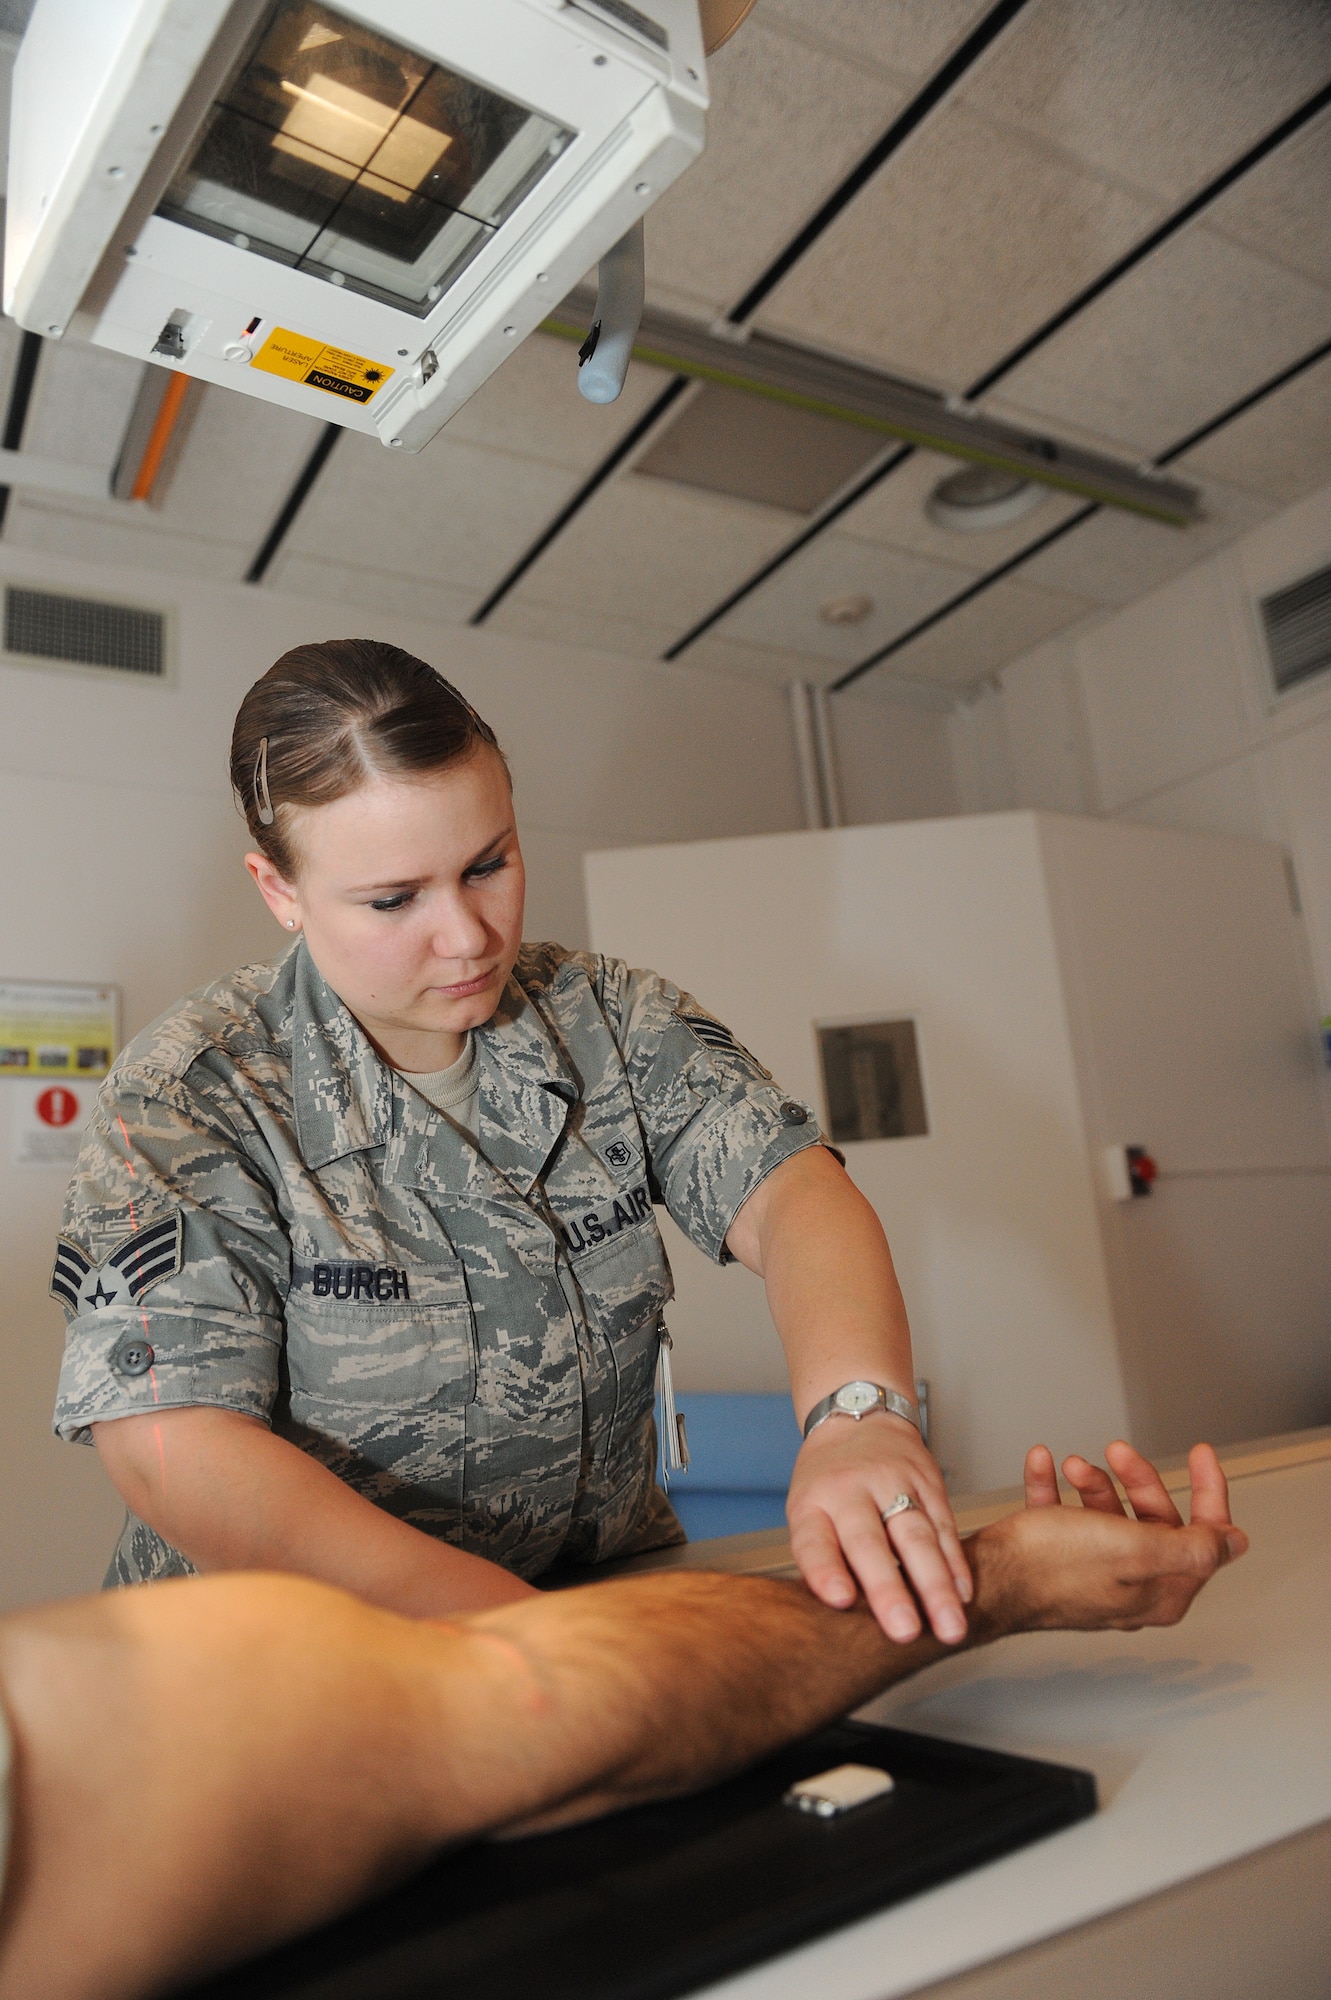 Senior Airman Casey Burch positions a patient for an anterior to posterior elbow X-ray at Scott Air Force Base, Ill., June 3, 2014.  Burch said she really tries to make her patients feel as comfortable as possible during the exam, even if it is an uncomfortable procedure.  Burch is a 375th Medical Support Squadron radiology technologist.  (U.S. Air Force photo by Staff Sgt. Maria Bowman)